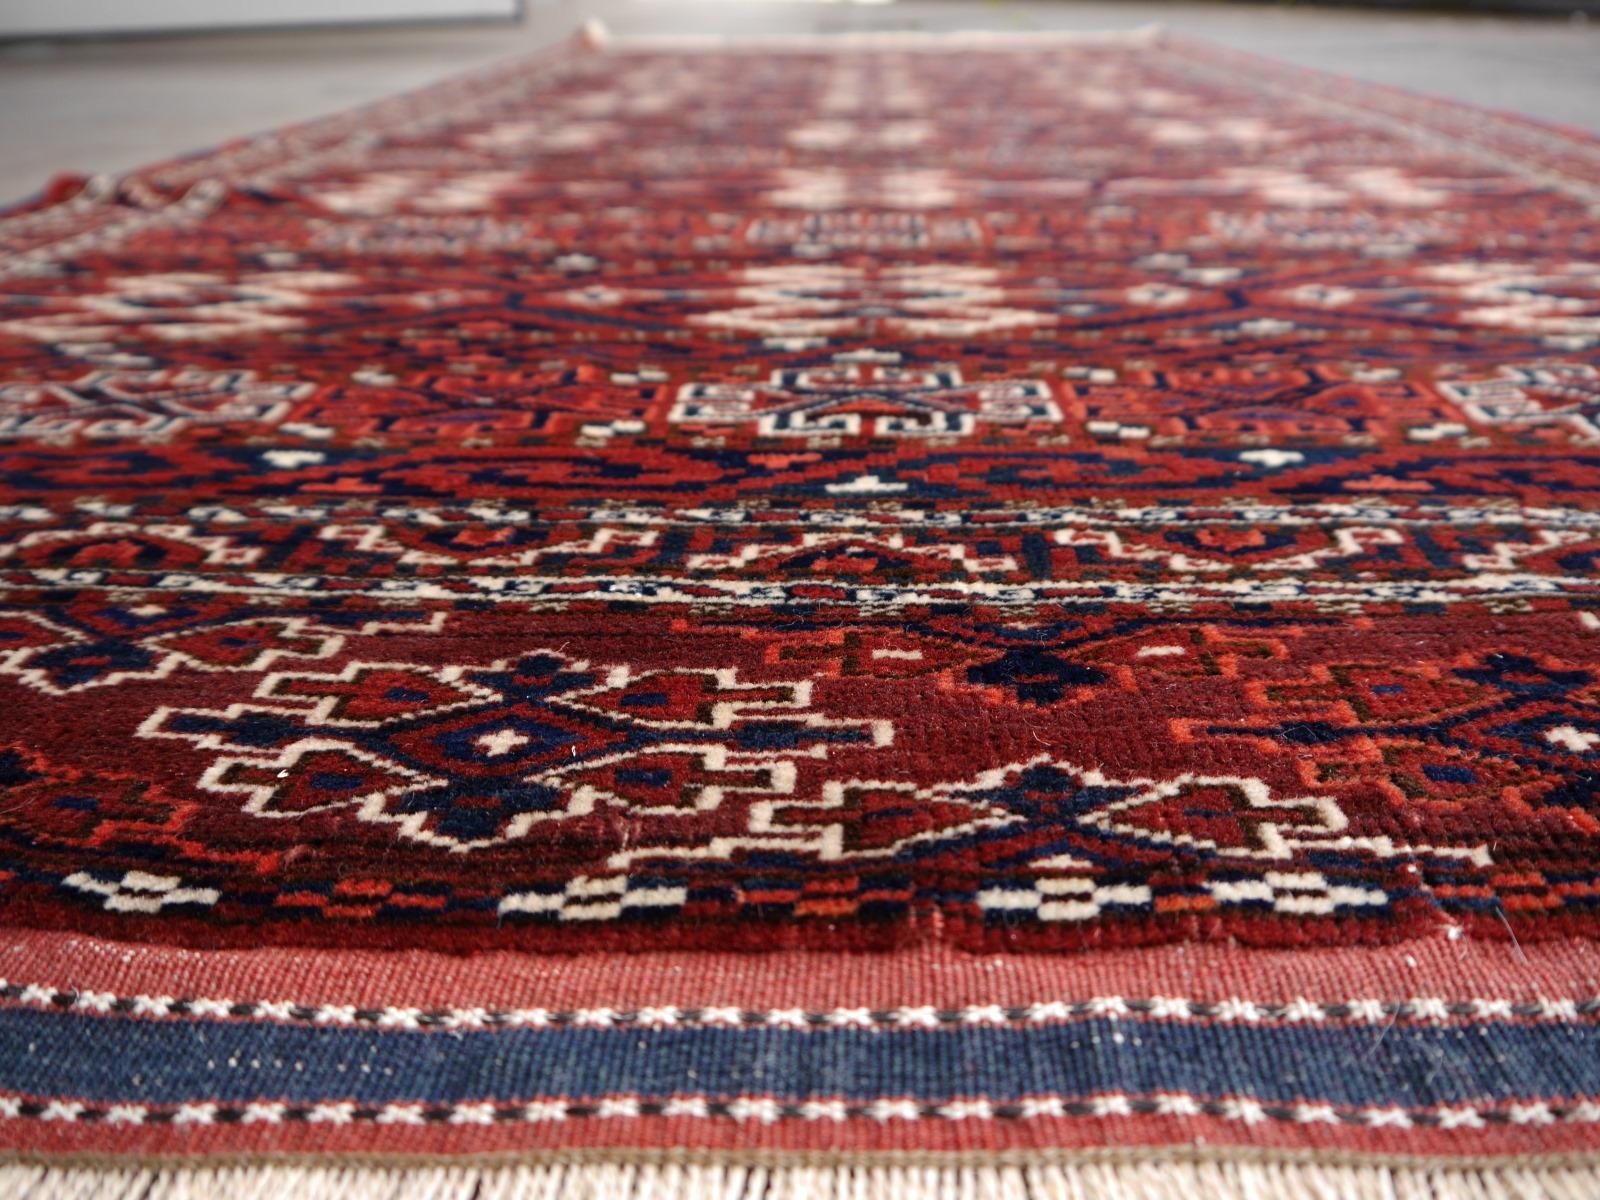 Yomud Tribeal Turkmen Turkoman Antique Rug with Ram Motive Hand Knotted Carpet For Sale 8